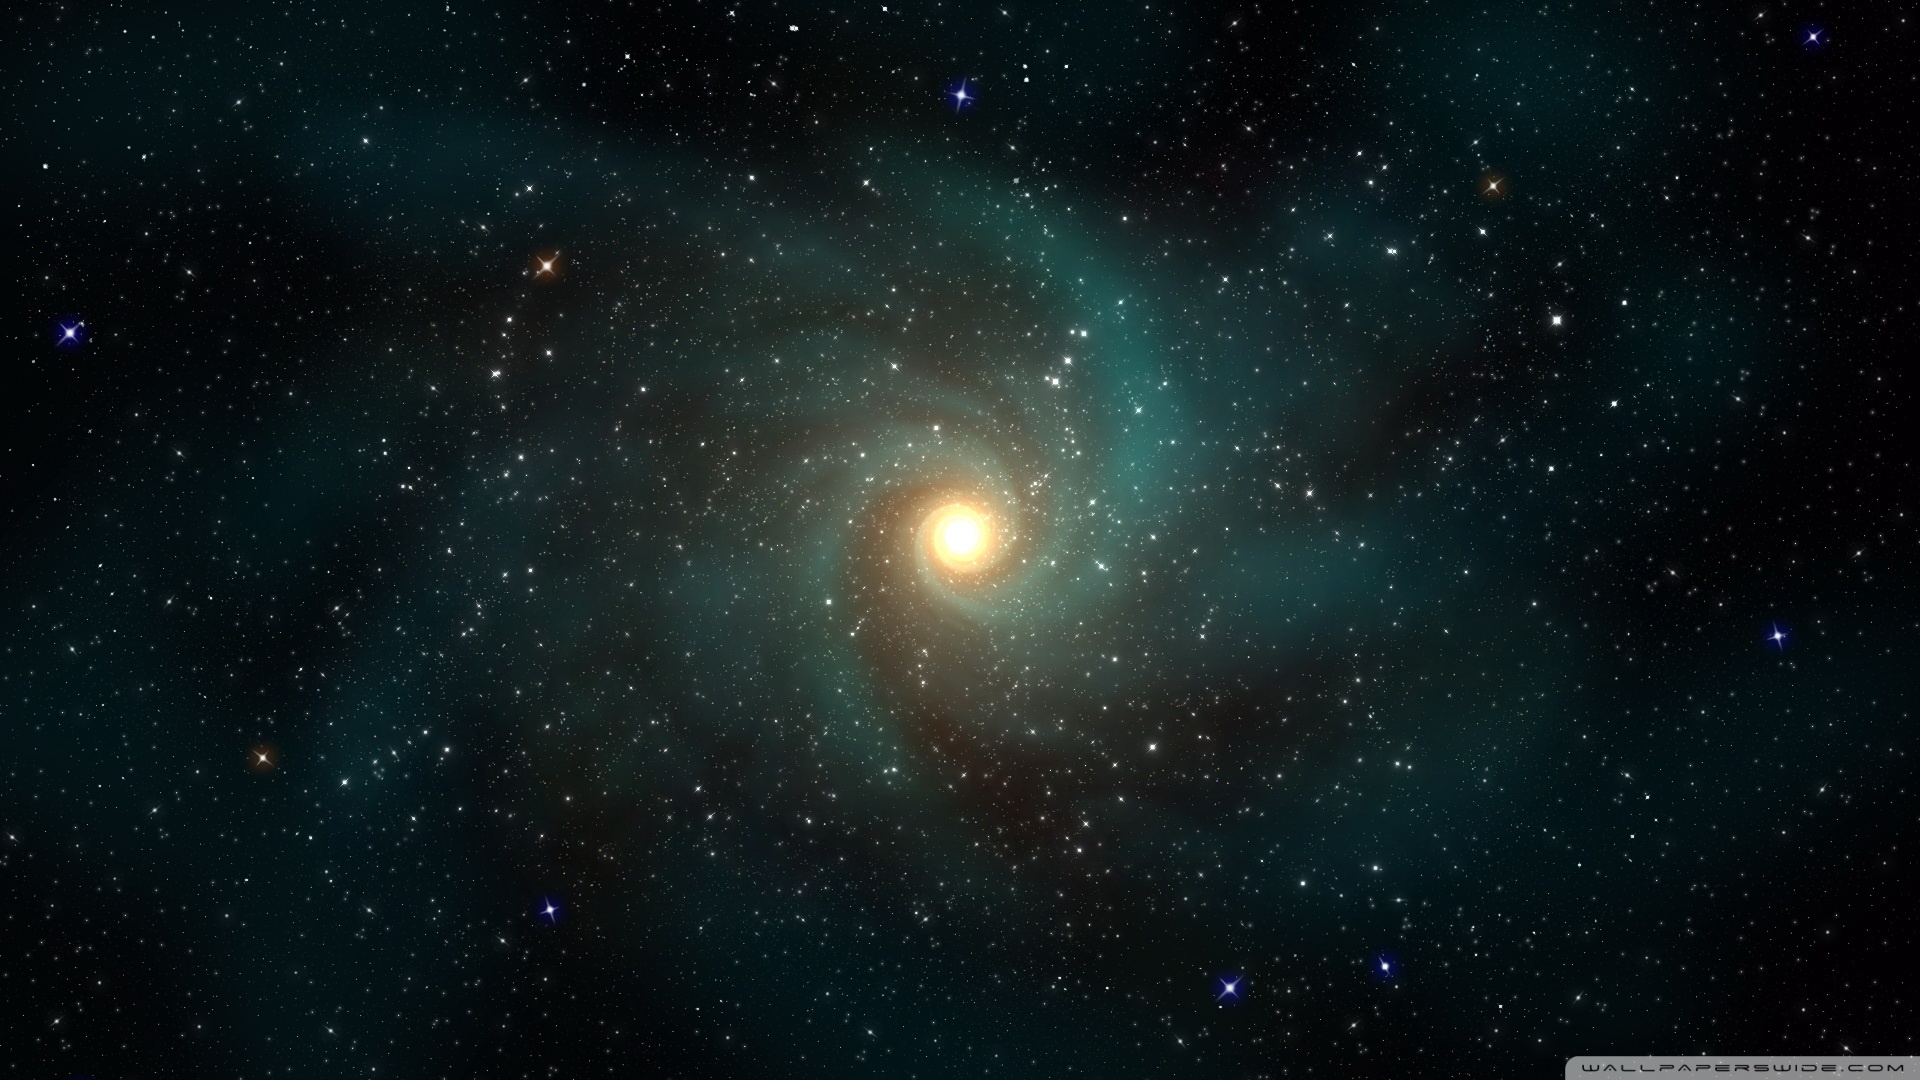 X HD Wallpaper Space Submited Image